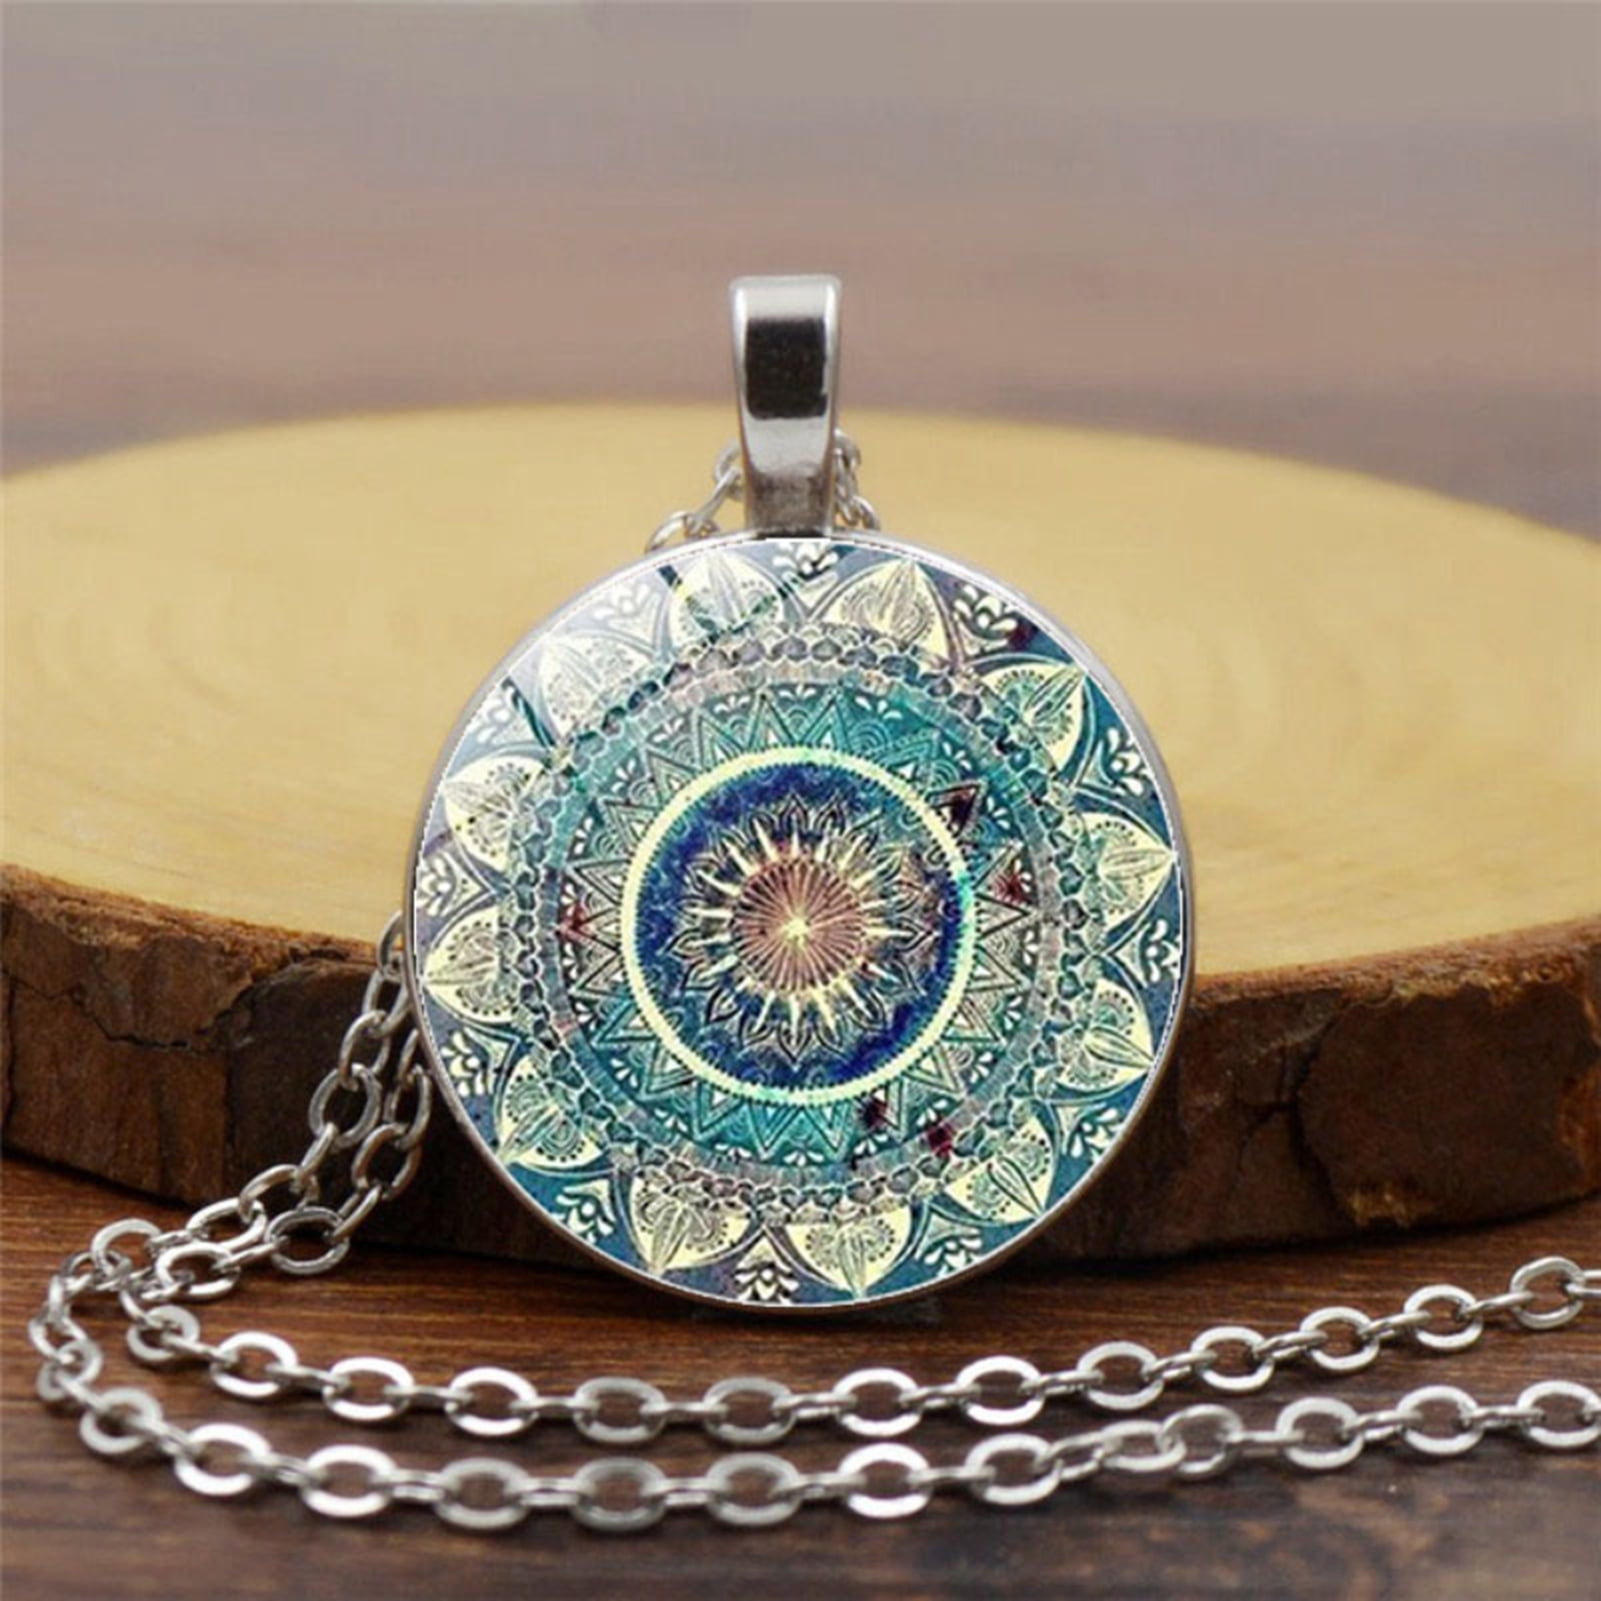 Flower of Life Photo Cabochon Glass Tibet Silver Chain Pendant Necklace 